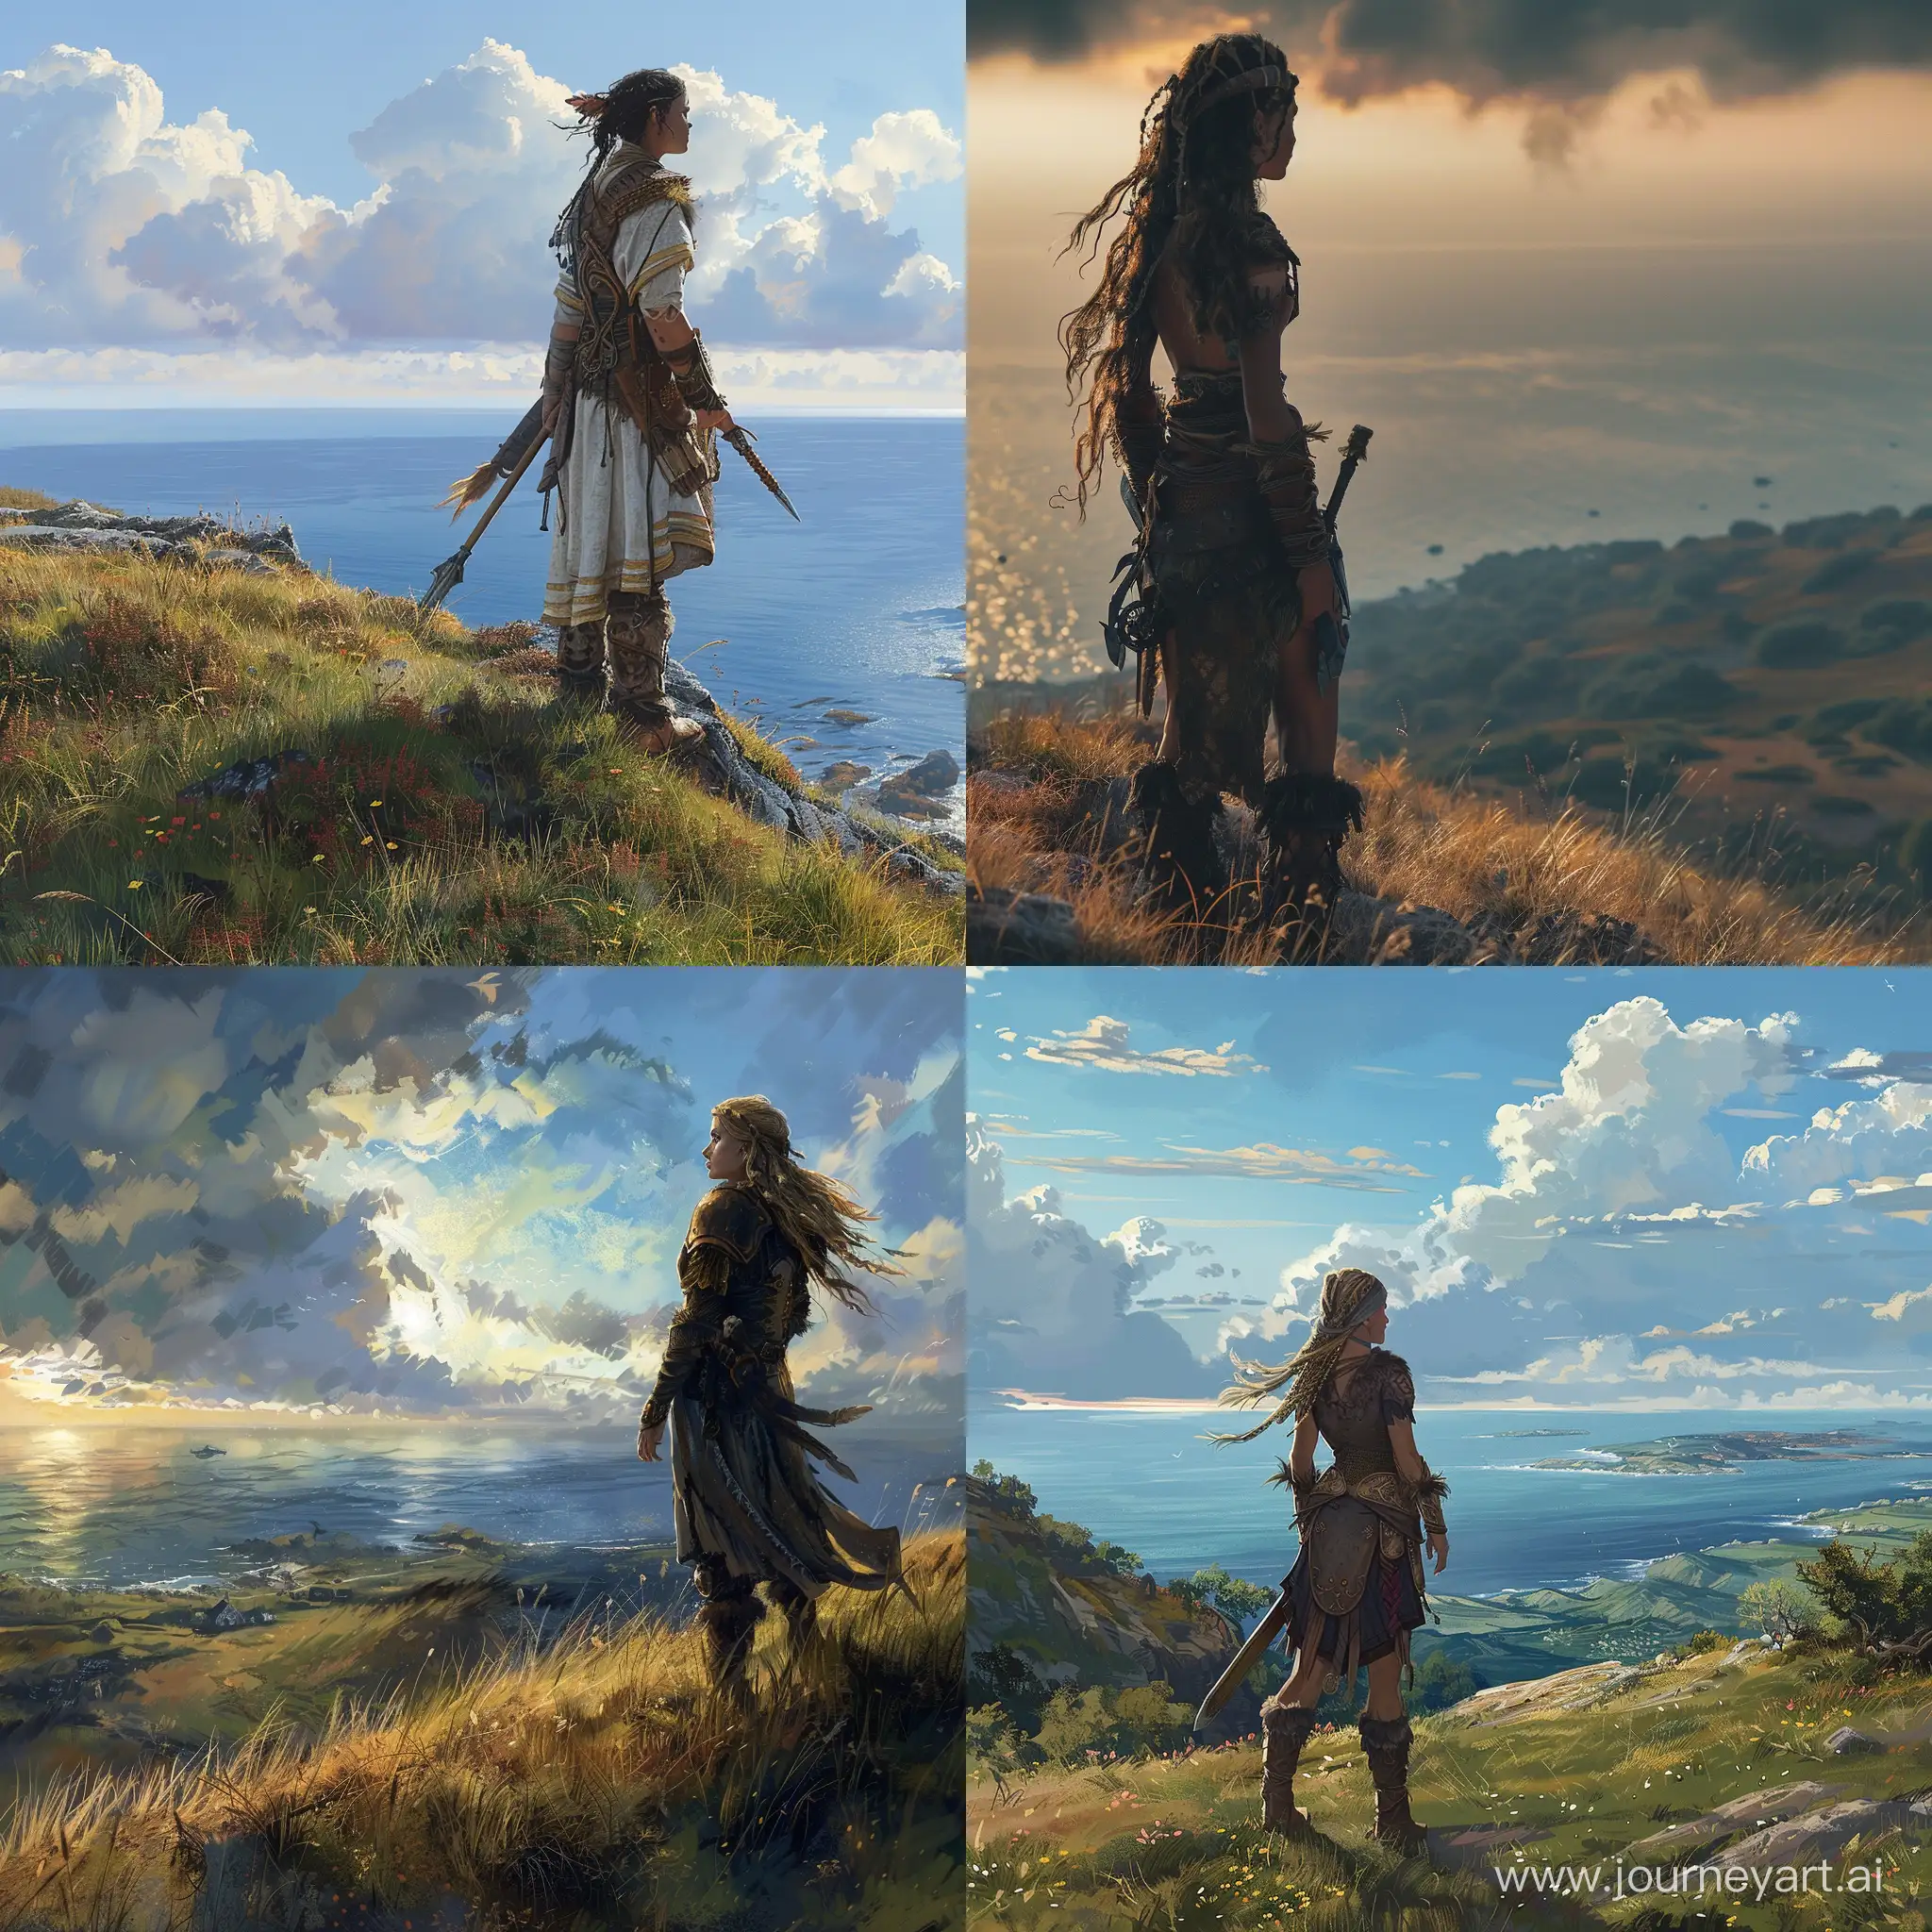 Warrior-Girl-Gazing-into-the-Sea-from-a-Hill-A-Mesmerizing-Landscape